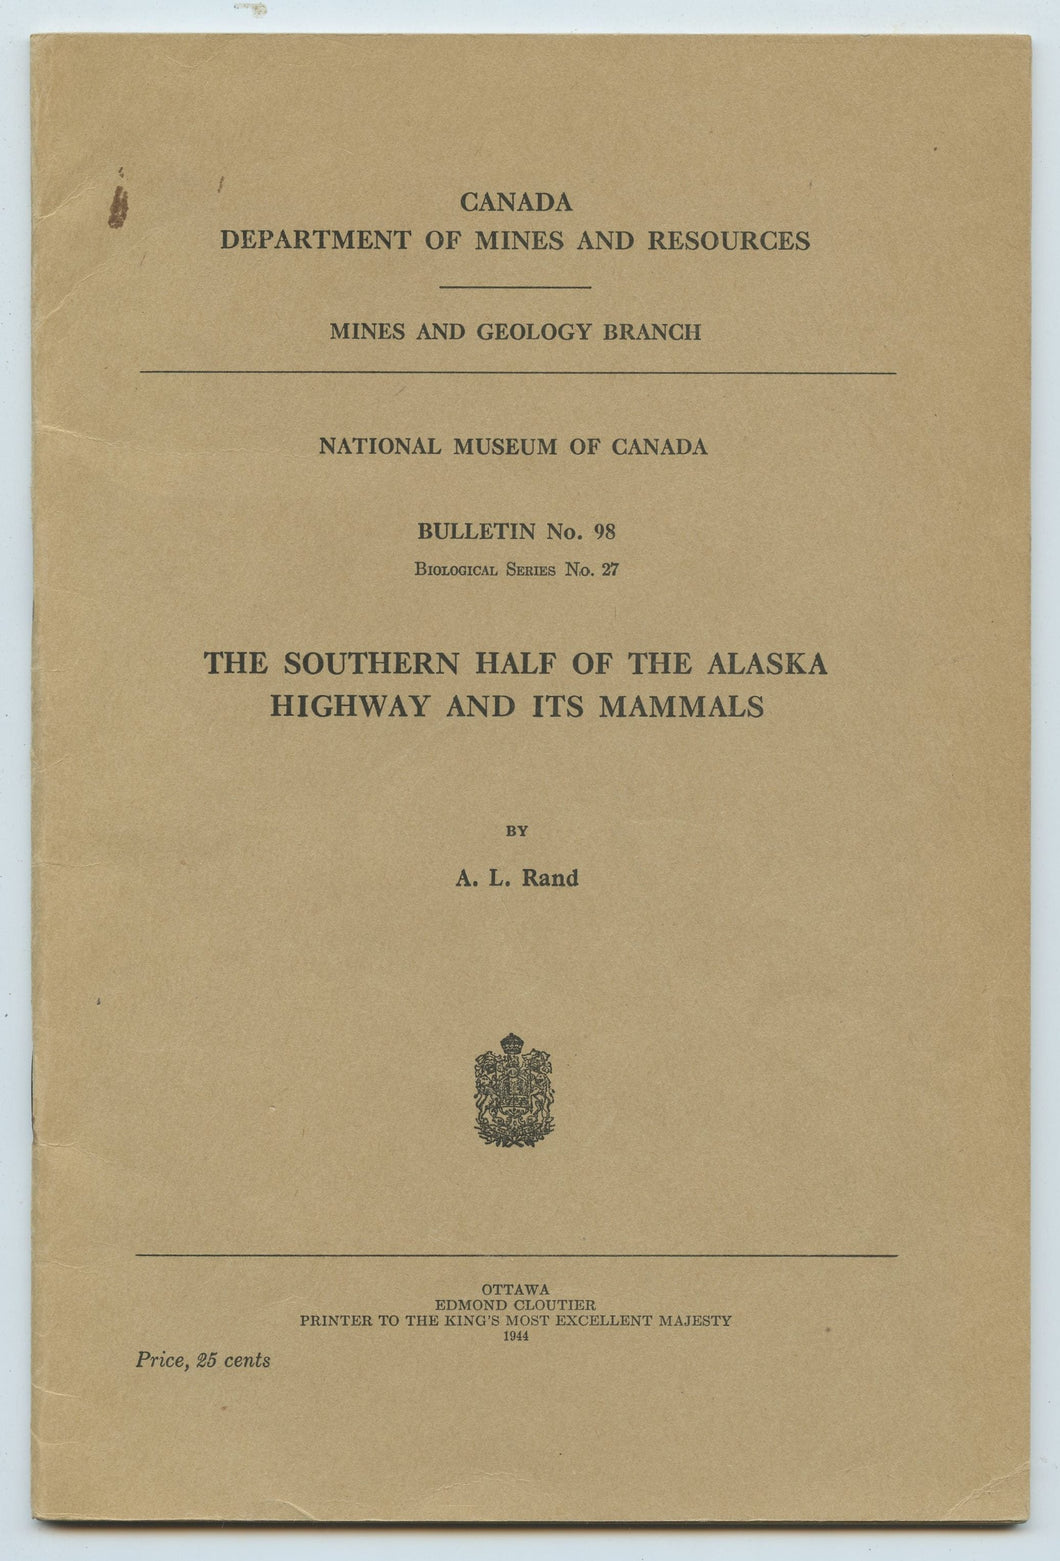 The Southern Half of the Alaska Highway and its Mammals